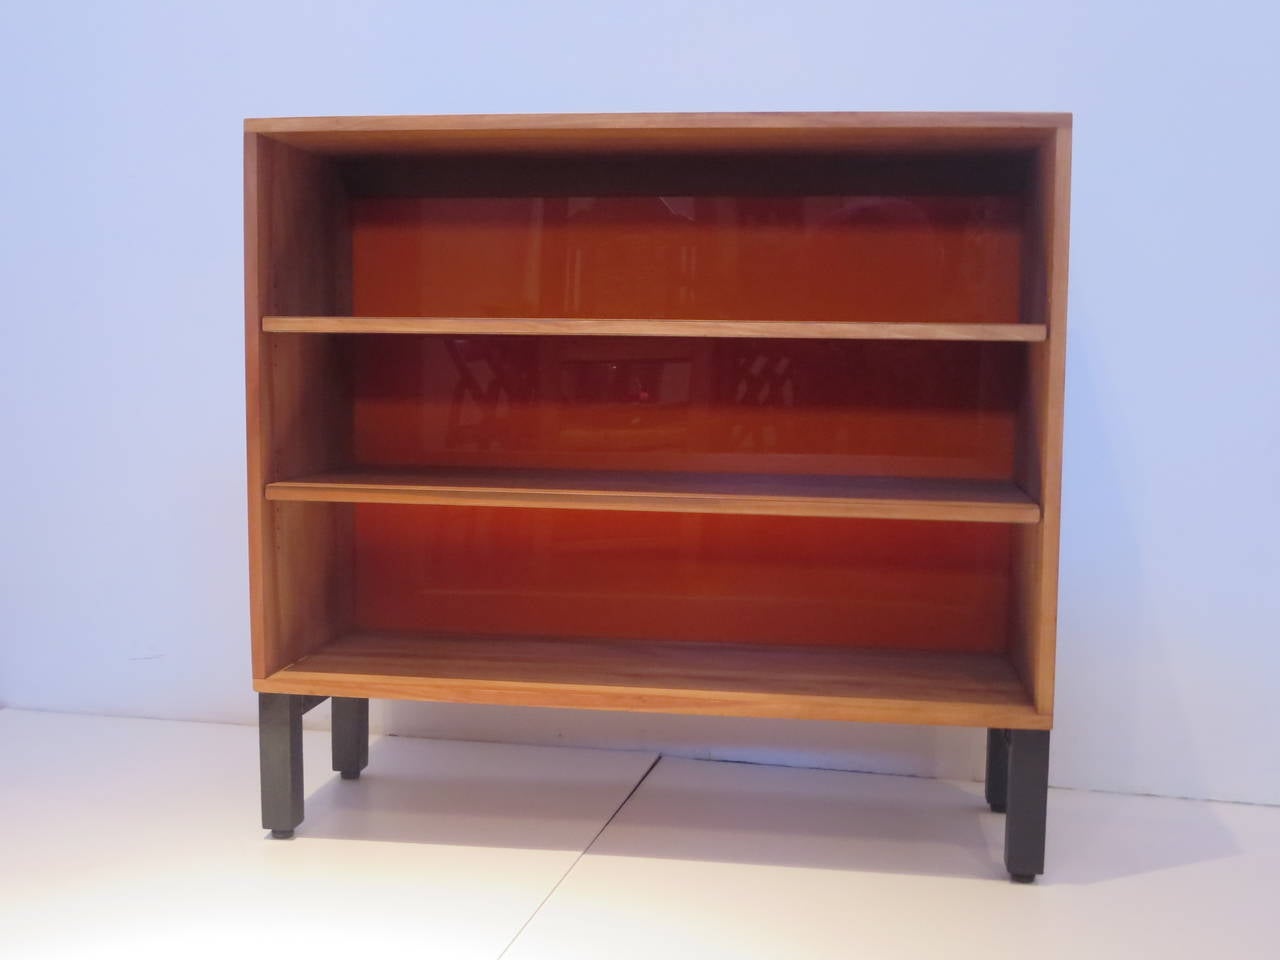 Acrylic American Modern 1950s  solid ash wood book caze with orange back.